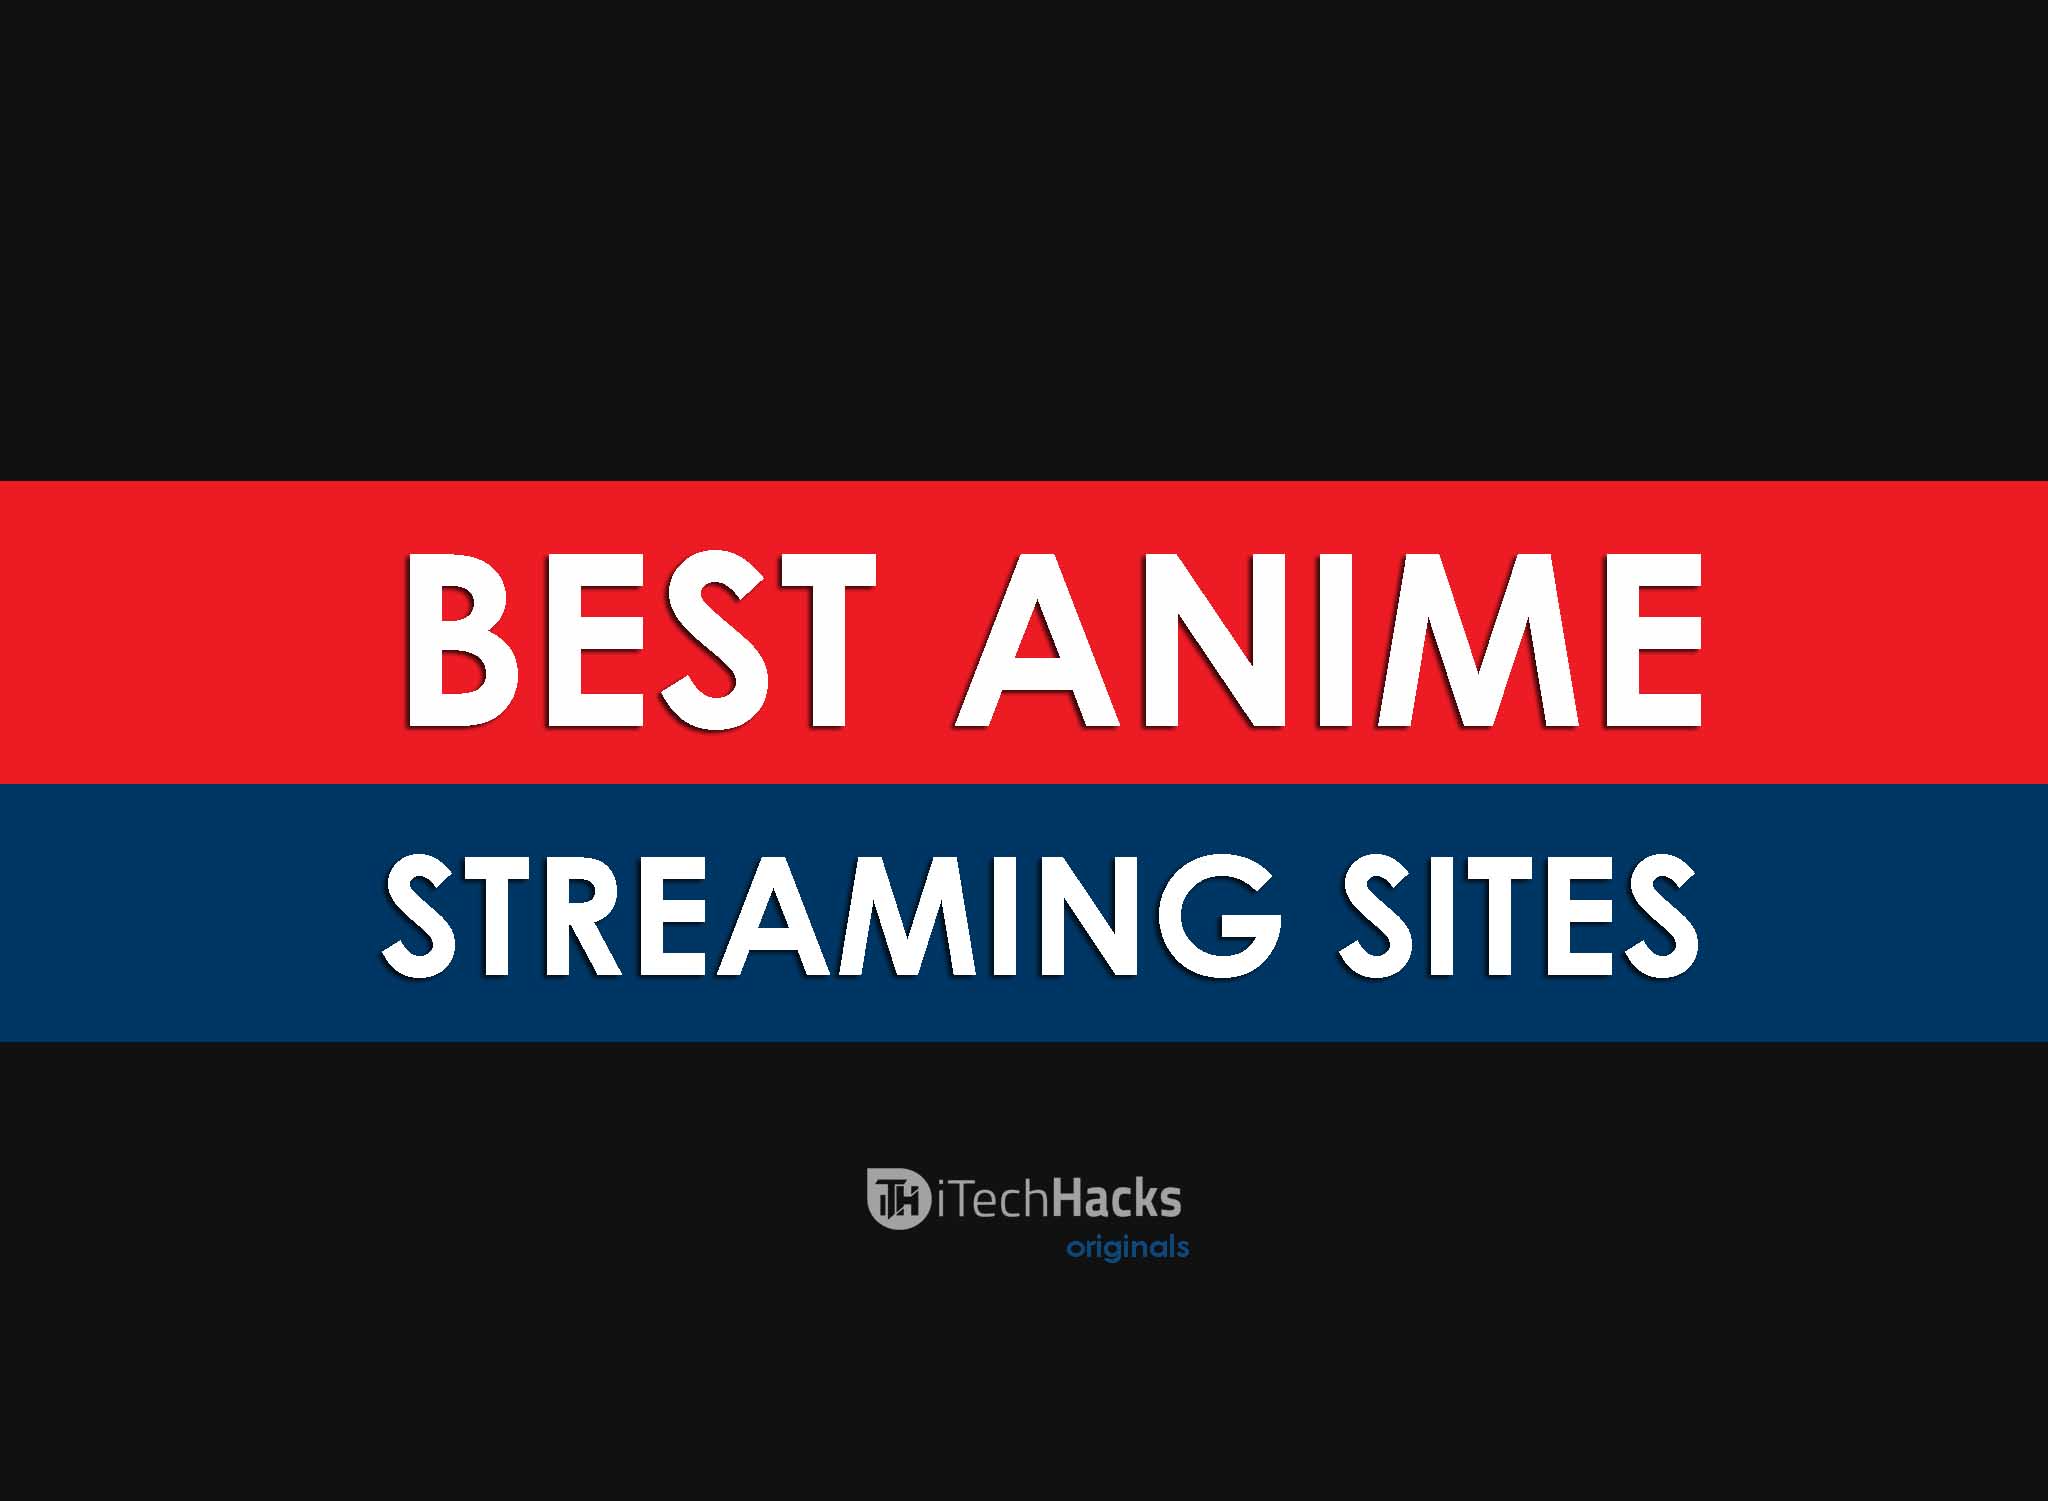 Free Anime Viewing Sites Hotsell - www.tearlecarver.co.uk 1694559286